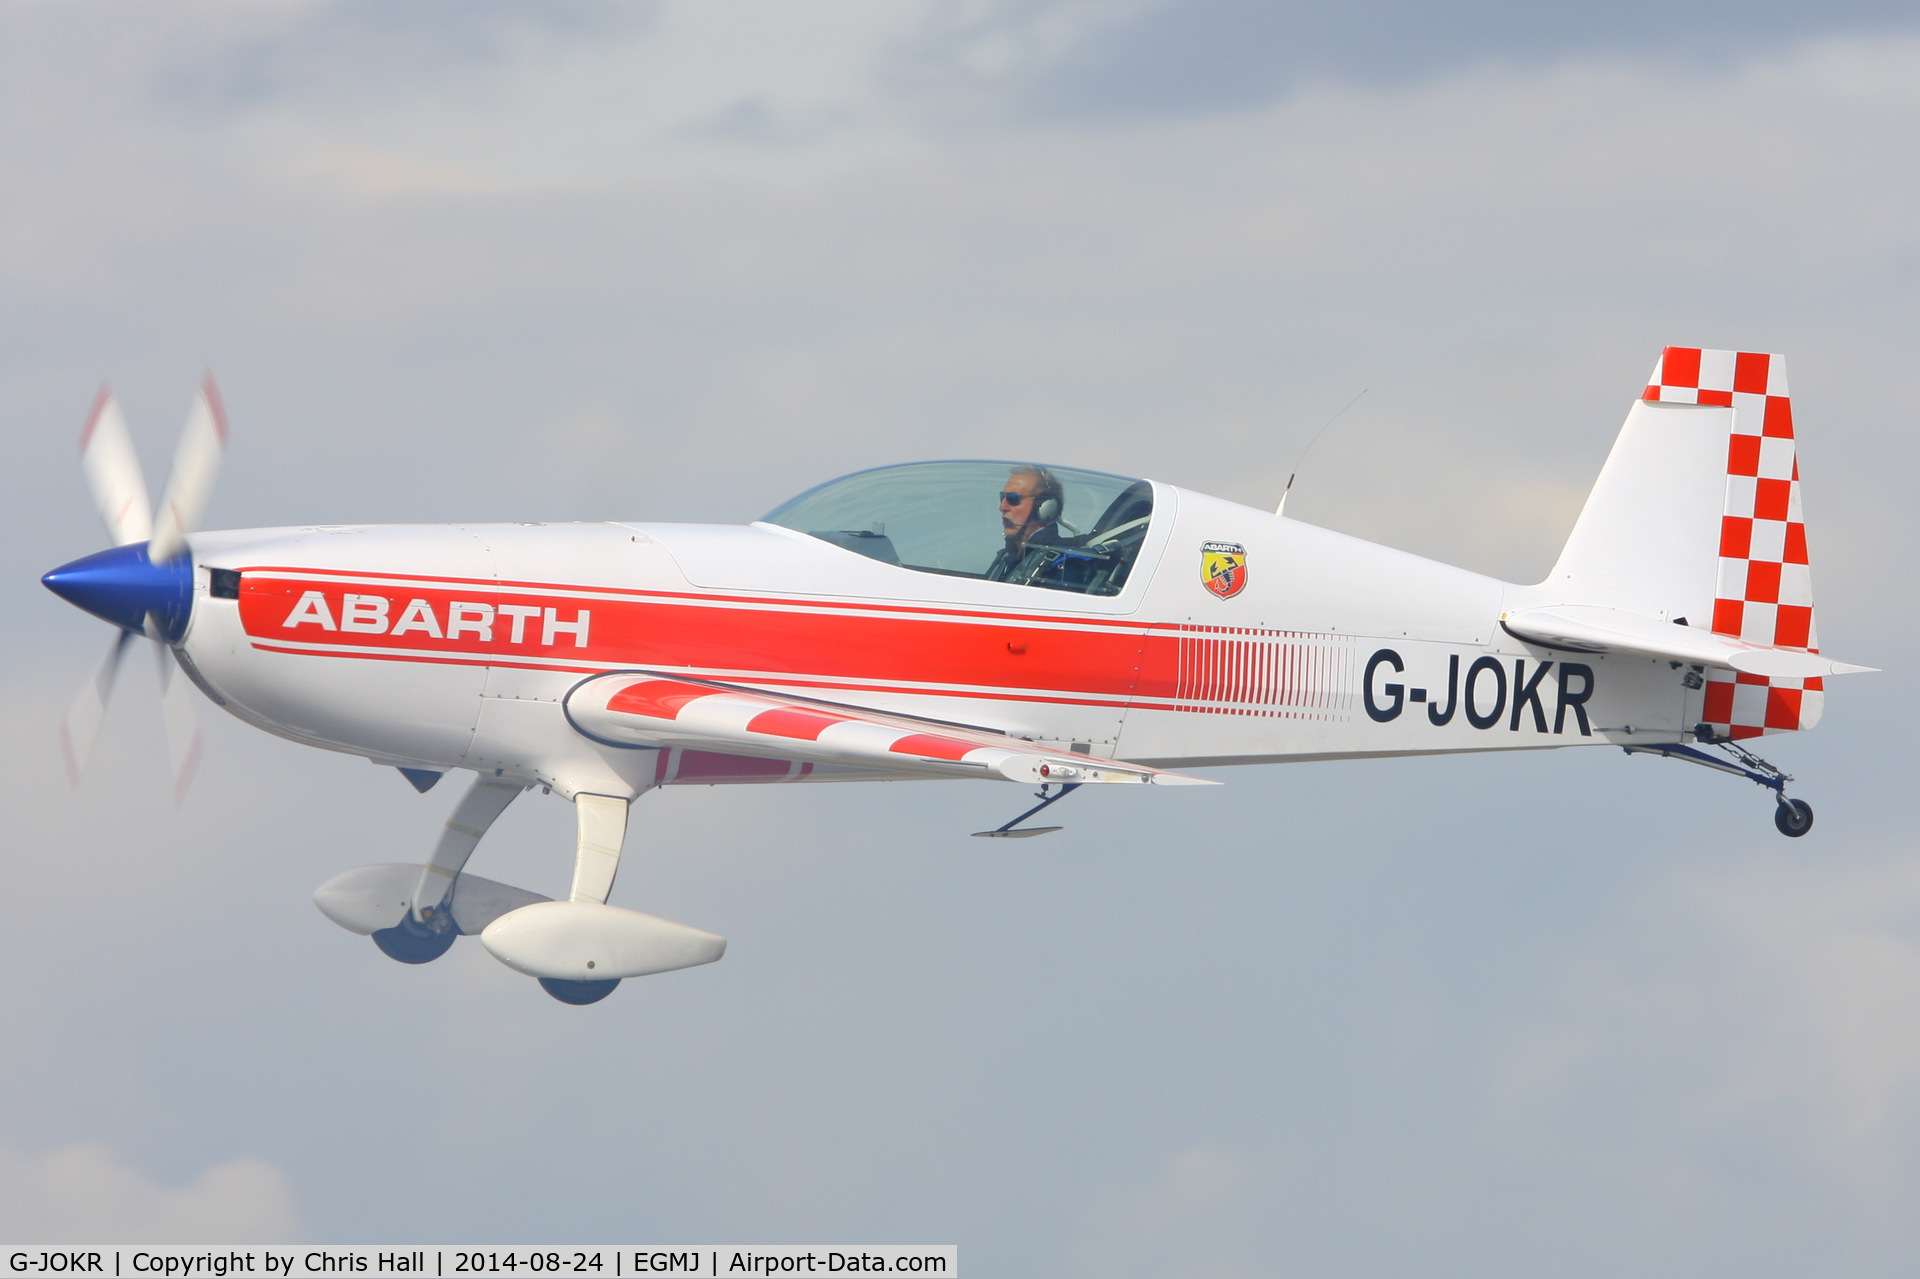 G-JOKR, 2008 Extra EA-300L C/N 1278, at the Little Gransden Airshow 2014